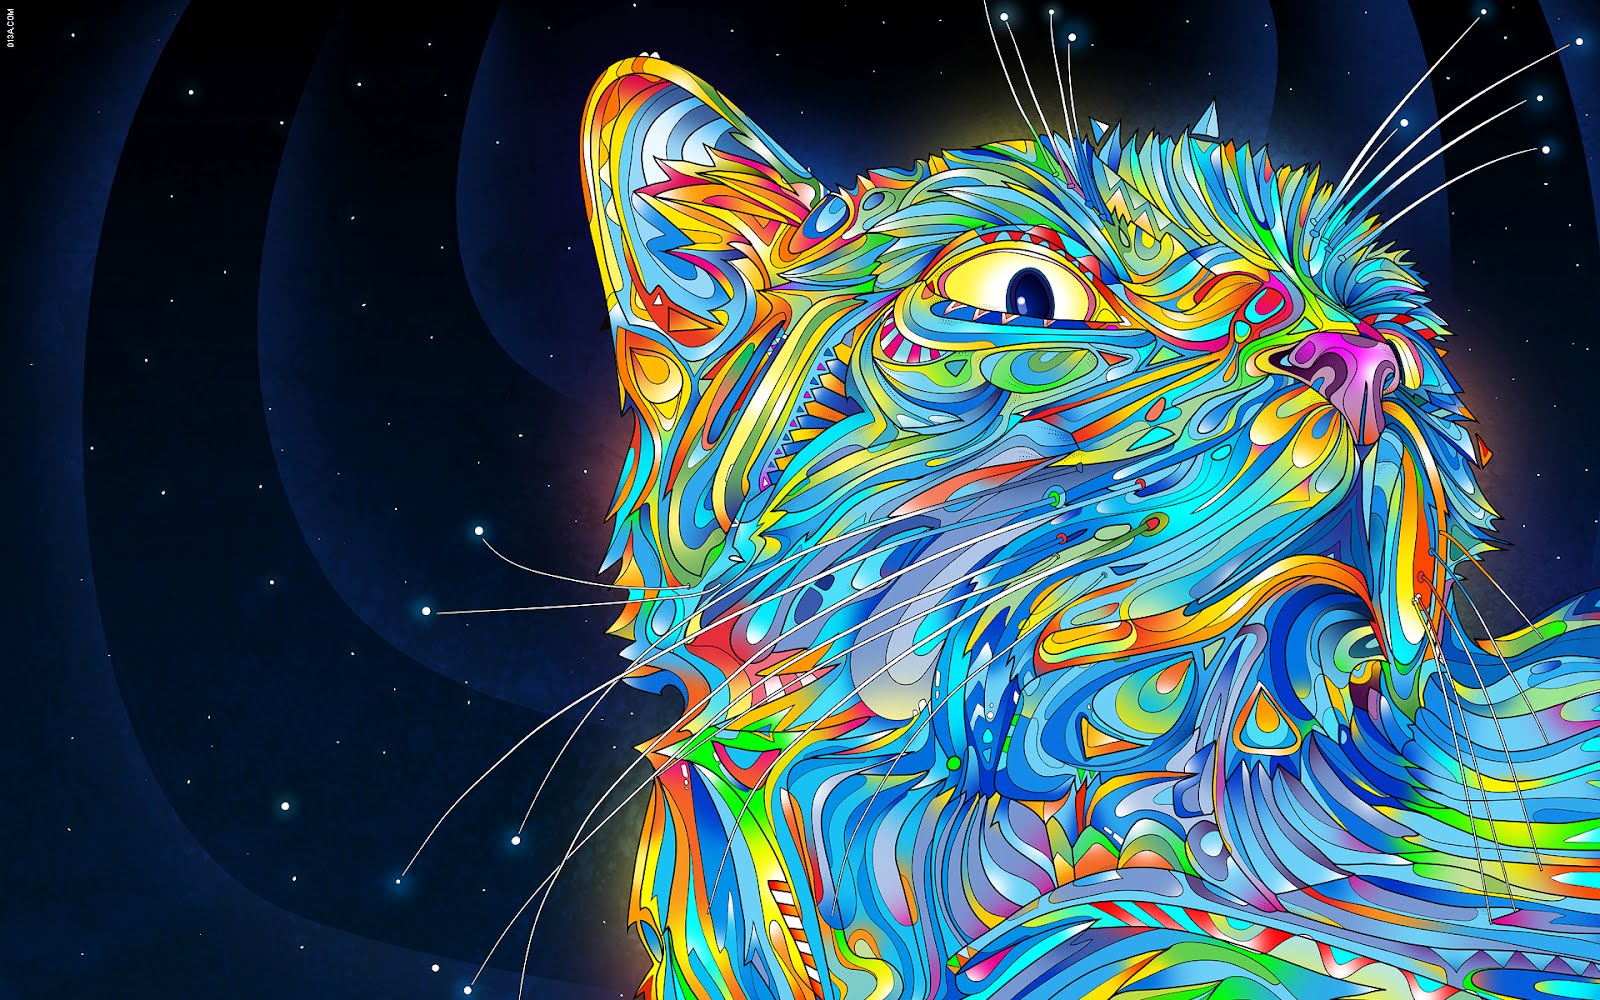 Trippy Backgrounds Hd 16002151000 125061 HD Wallpaper Res 1600x1000